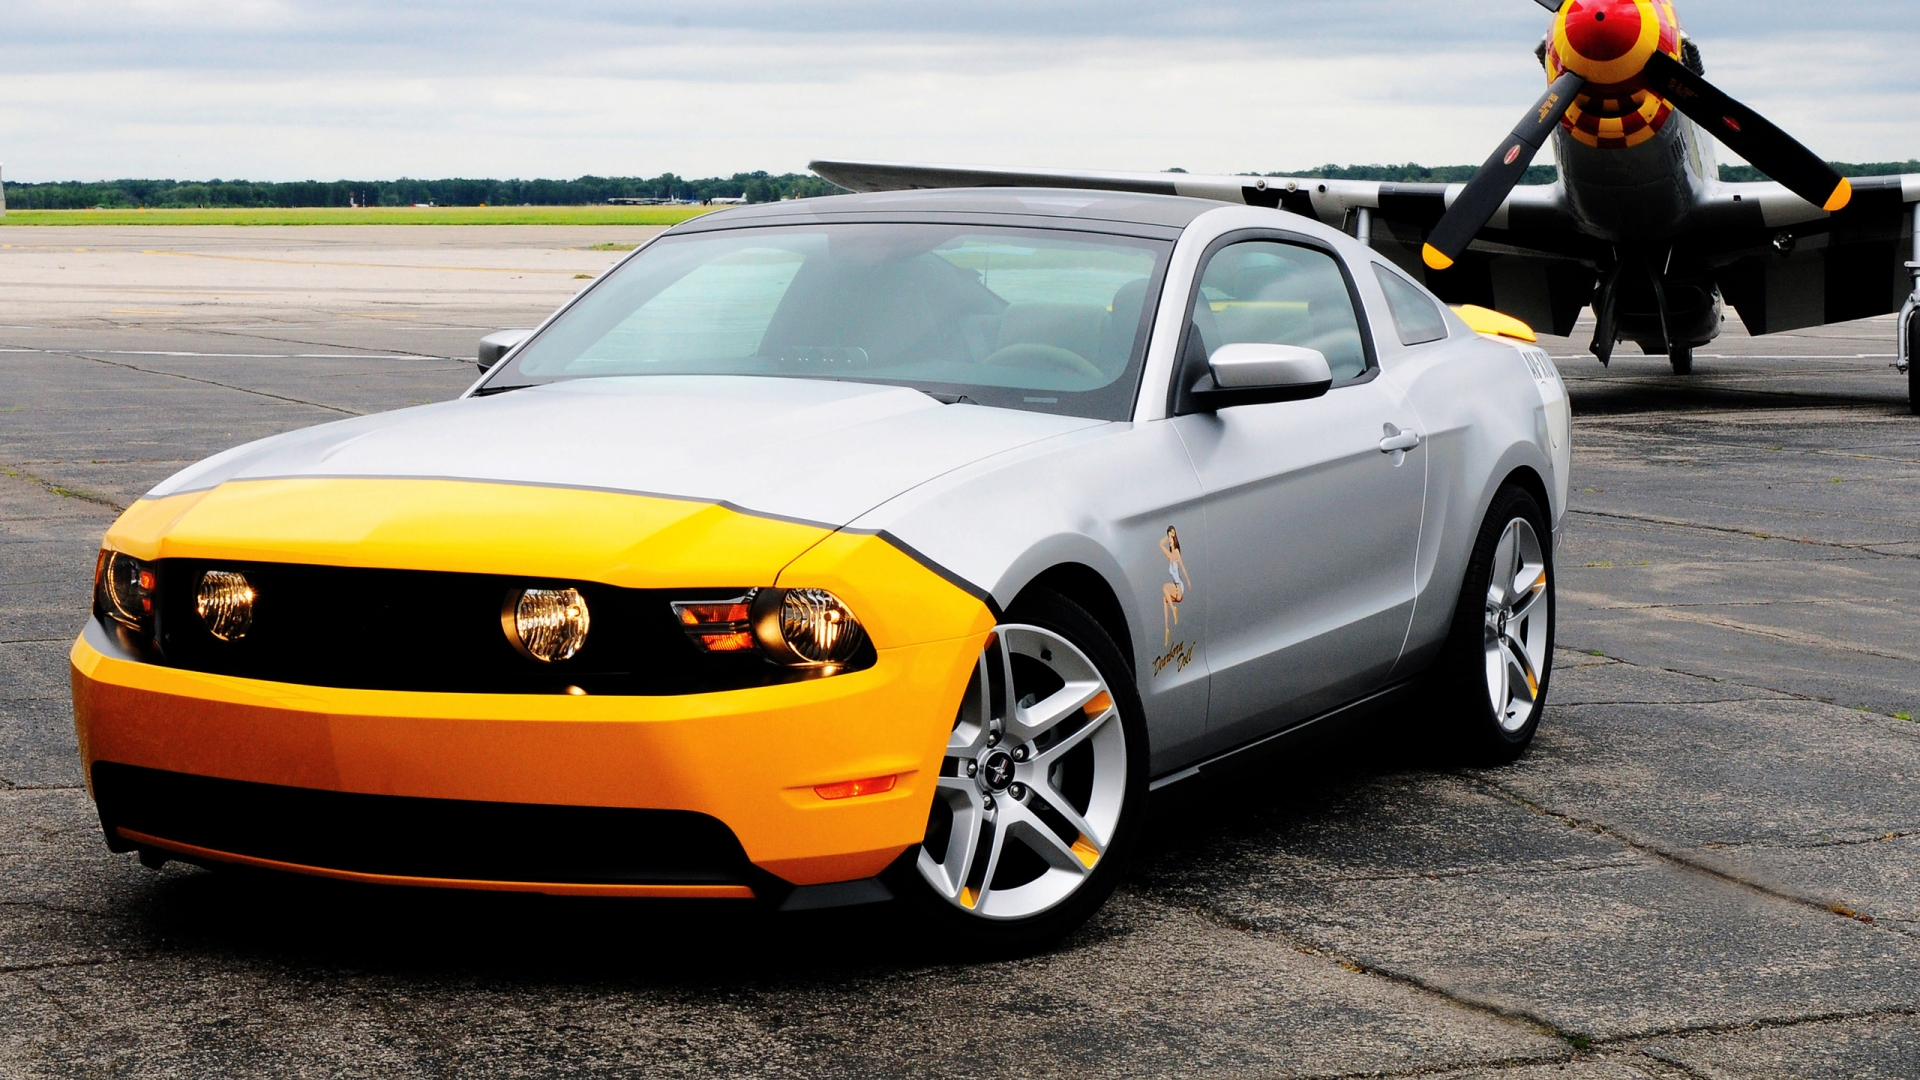 Ford Mustang Dearborn Doll for 1920 x 1080 HDTV 1080p resolution